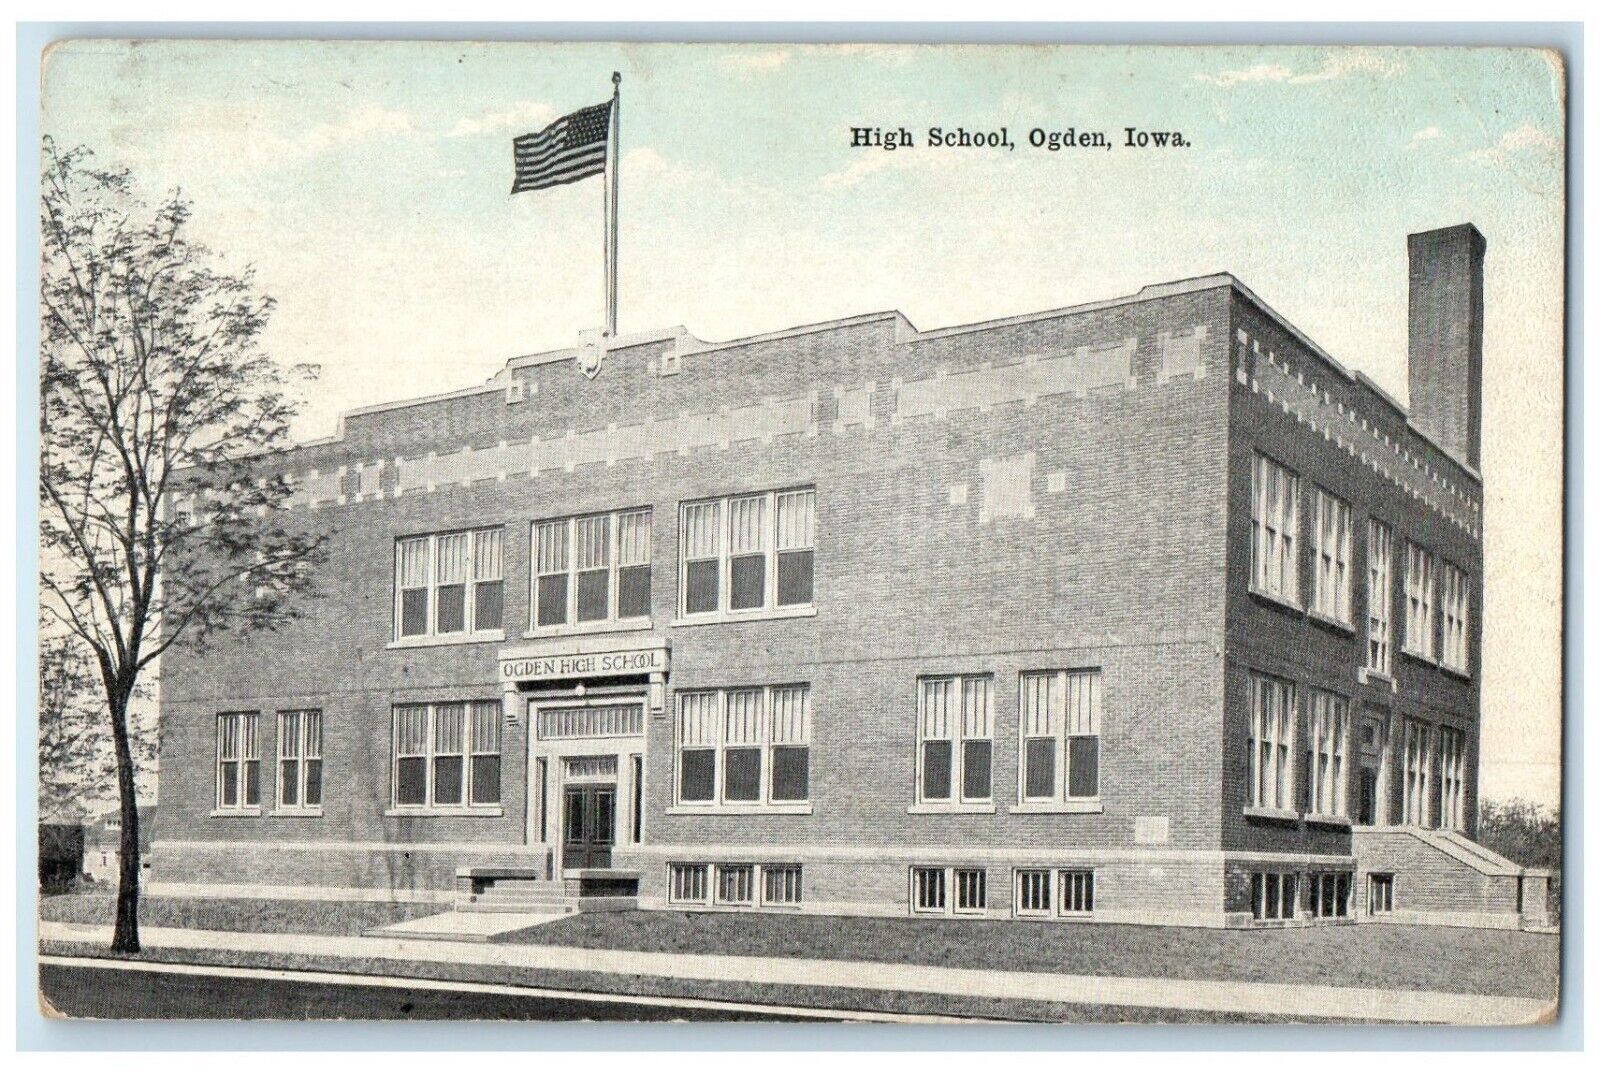 1928 View Of High School Building Campus Ogden Iowa IA Posted Vintage Postcard